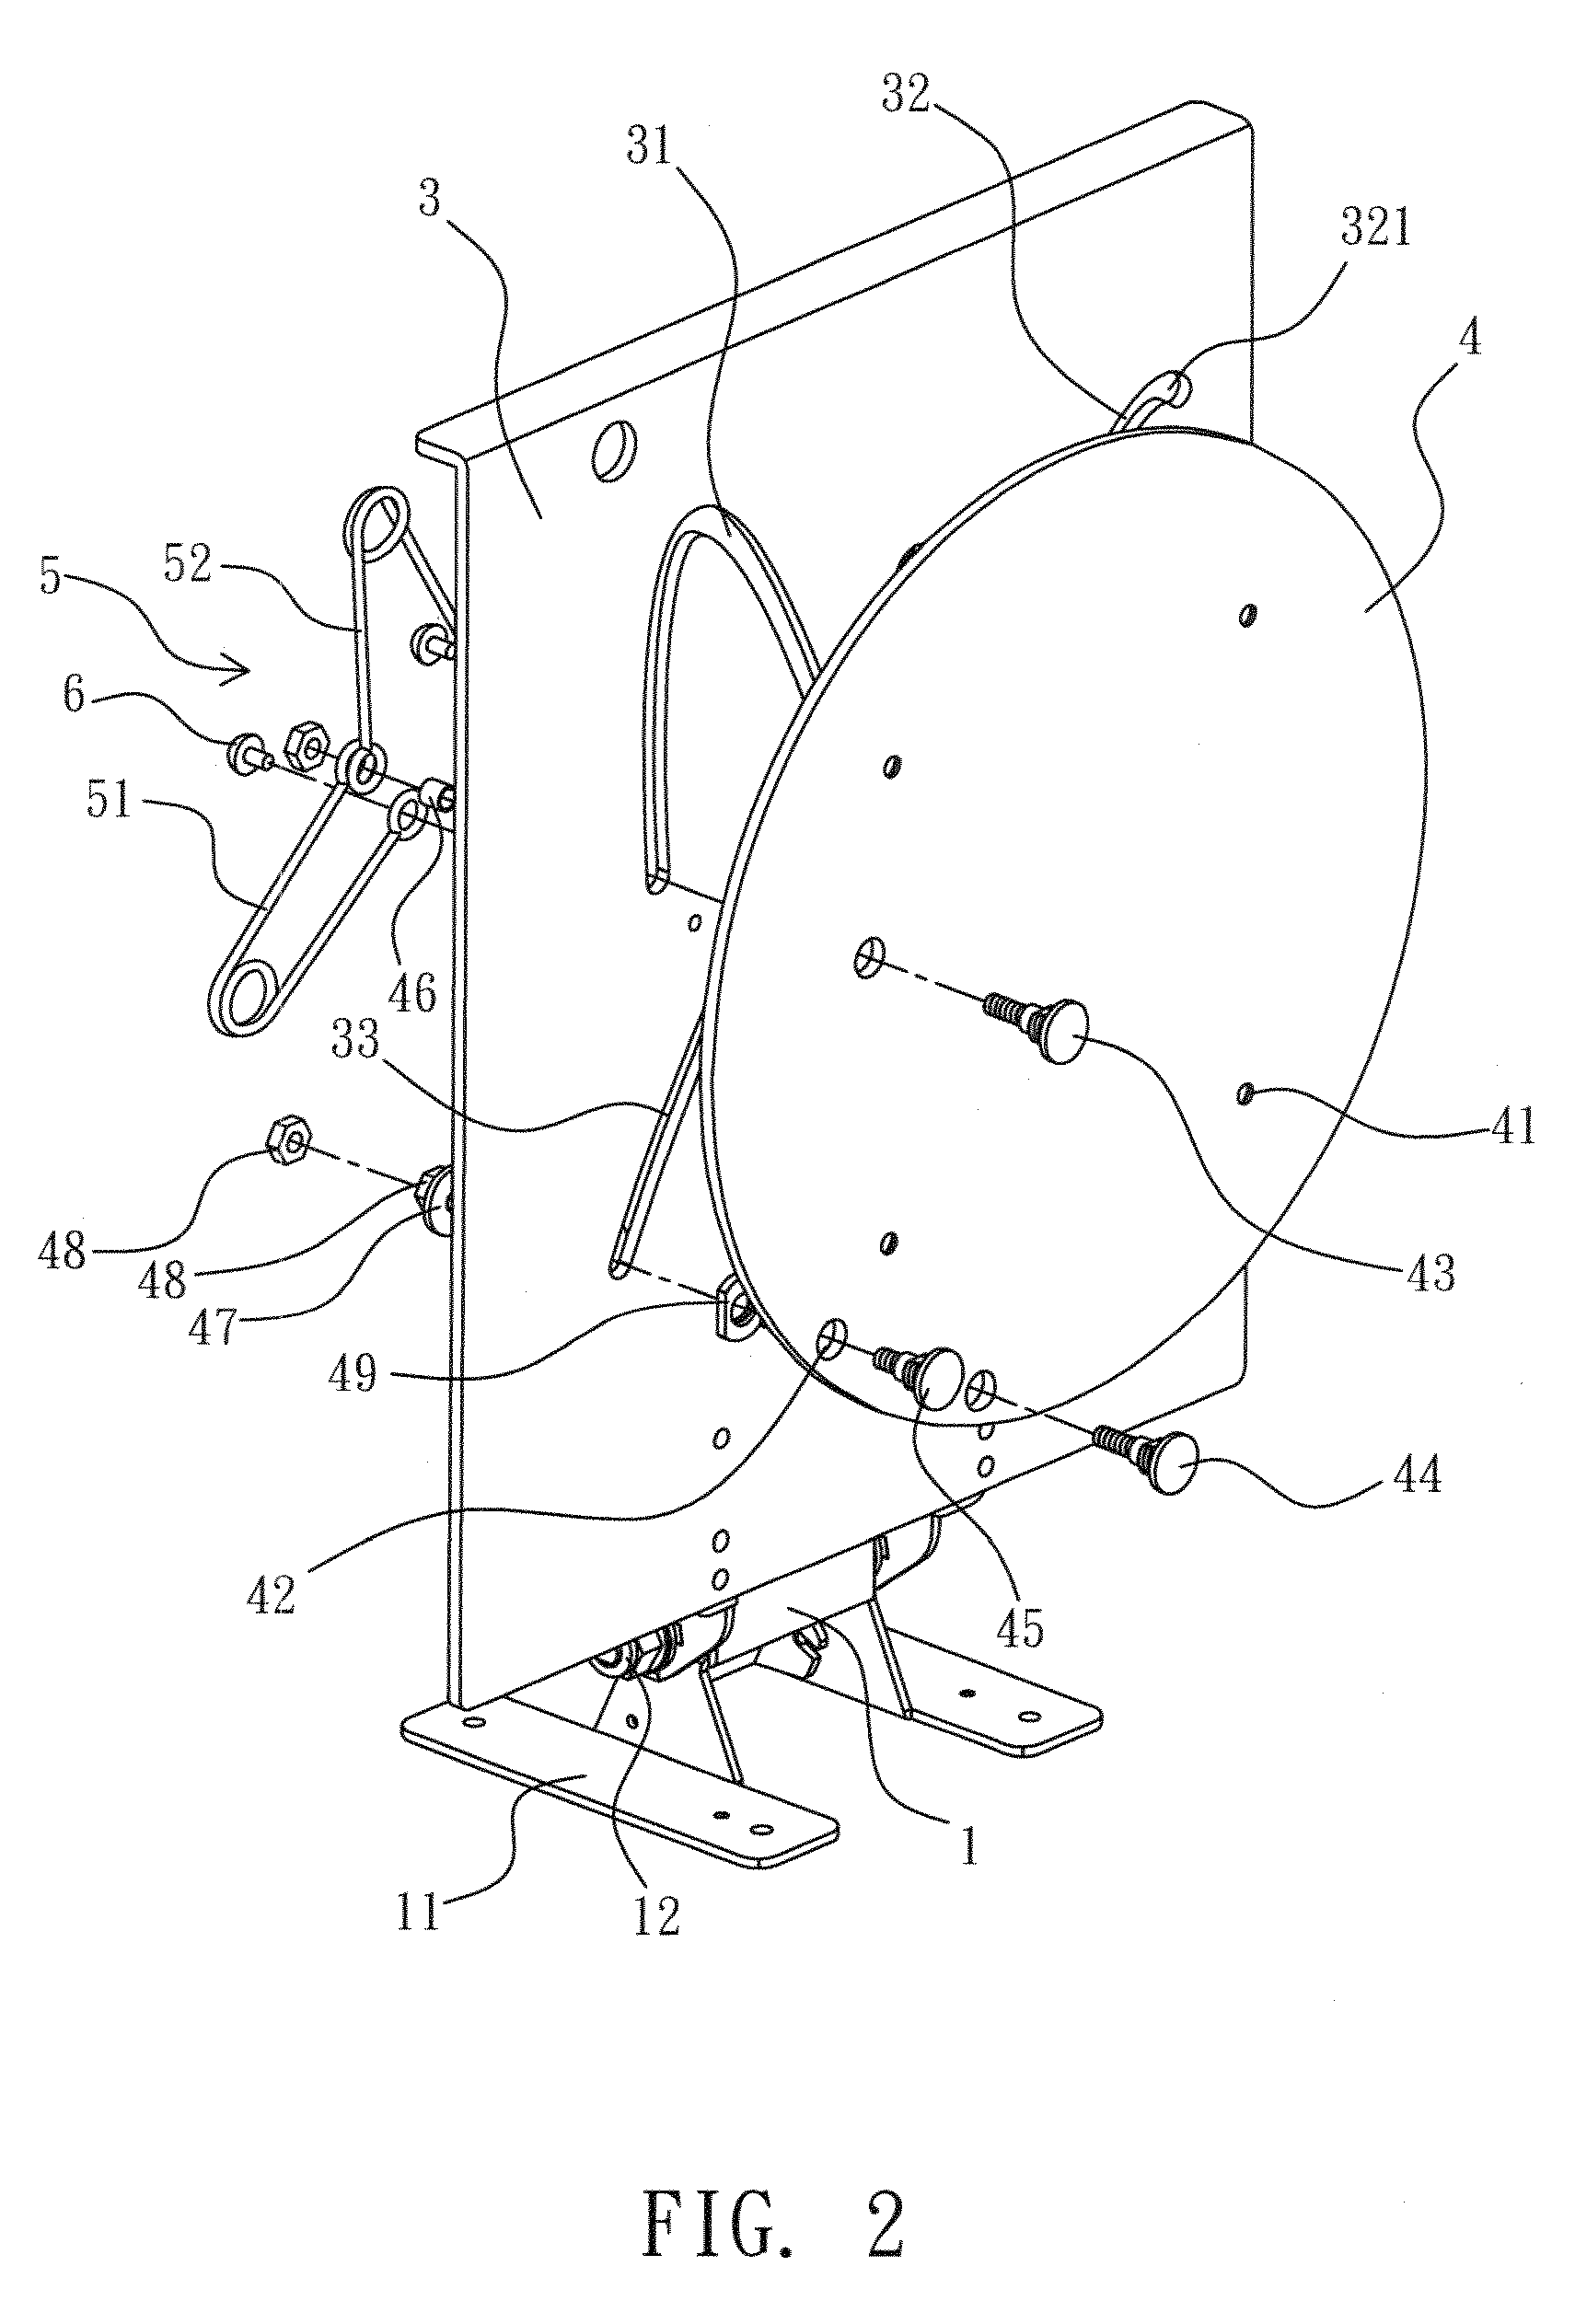 Planar rotation mechanism of supporting device